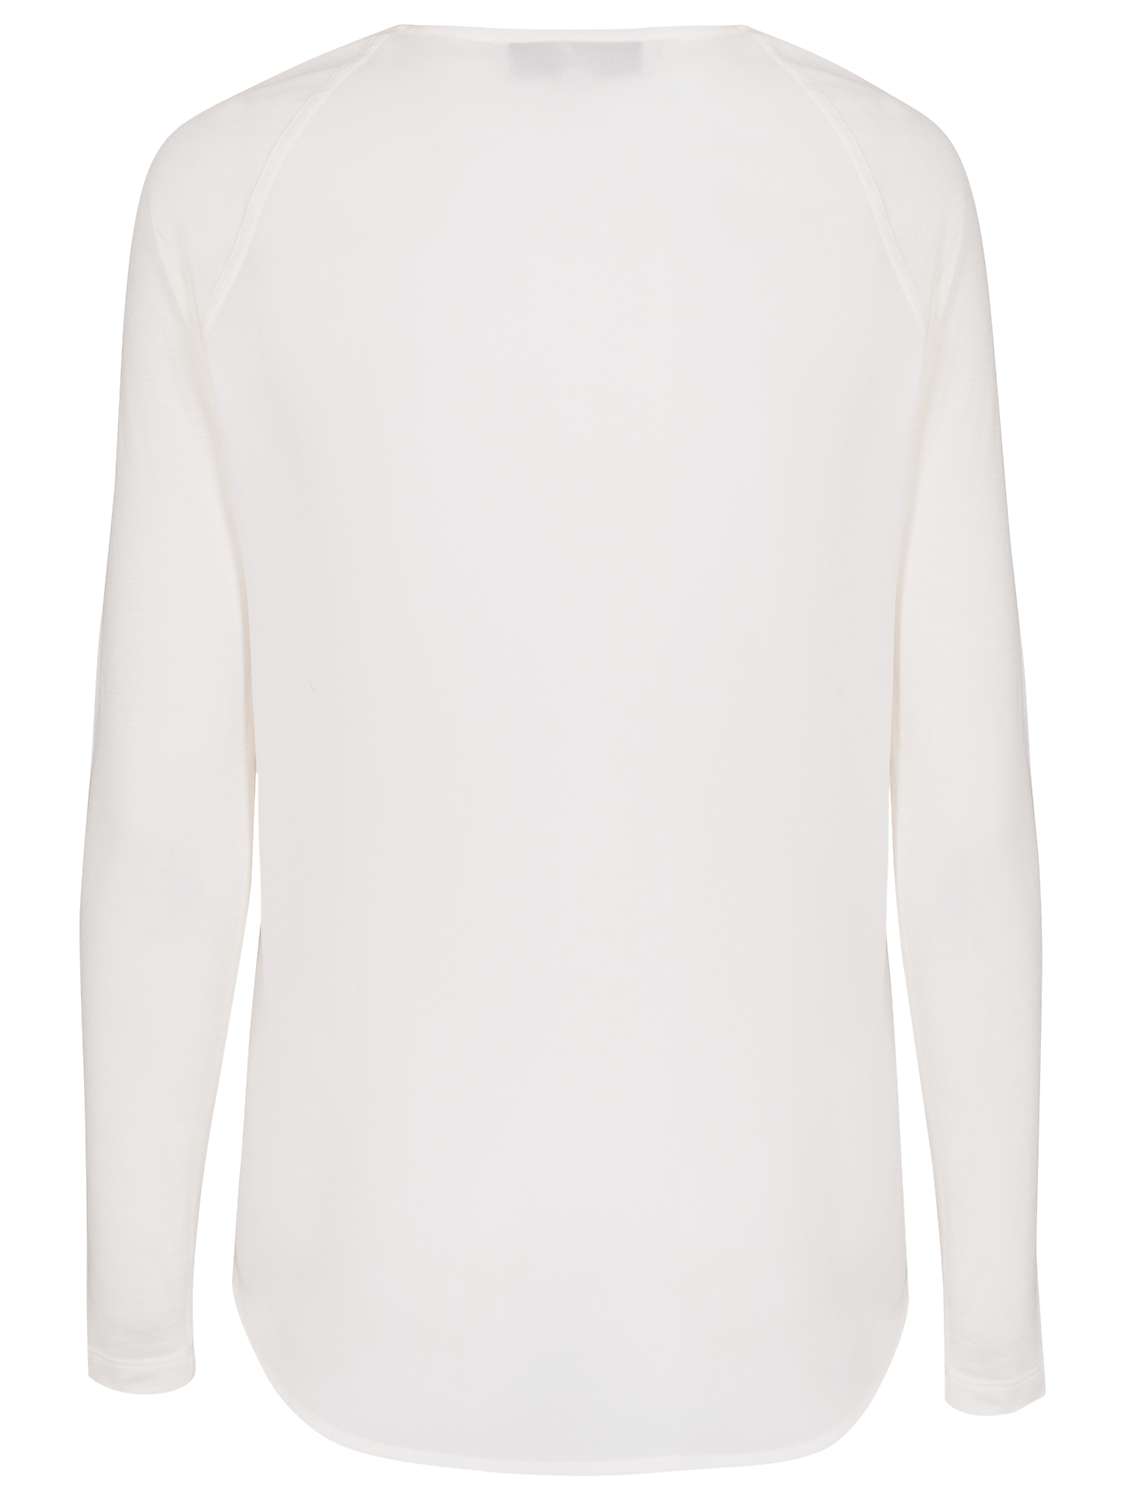 Buy French Connection Polly Plains Top, Classic Cream Online at johnlewis.com